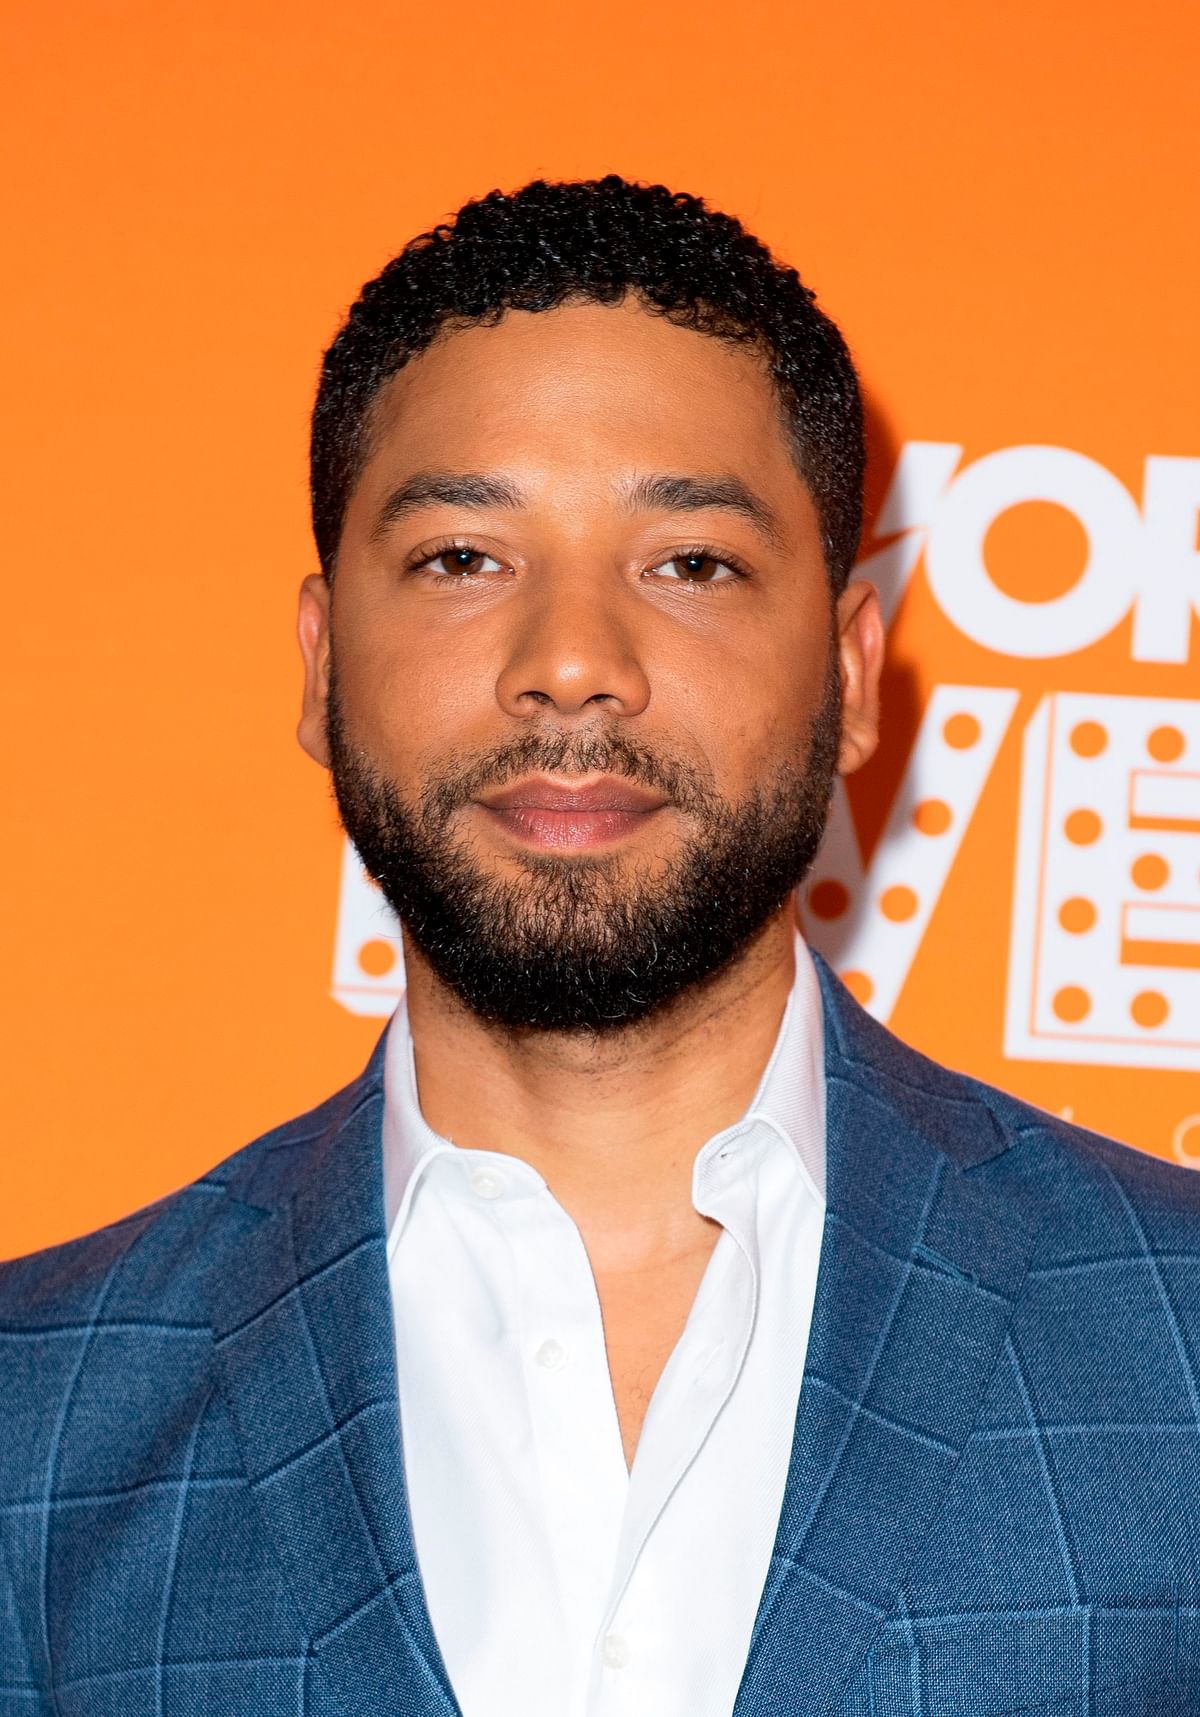 In this file photo taken on 2 December 2018 US actor Jussie Smollett attends the Trevor Live Los Angeles Gala 2018, in Beverly Hills, California. Photo: AFP